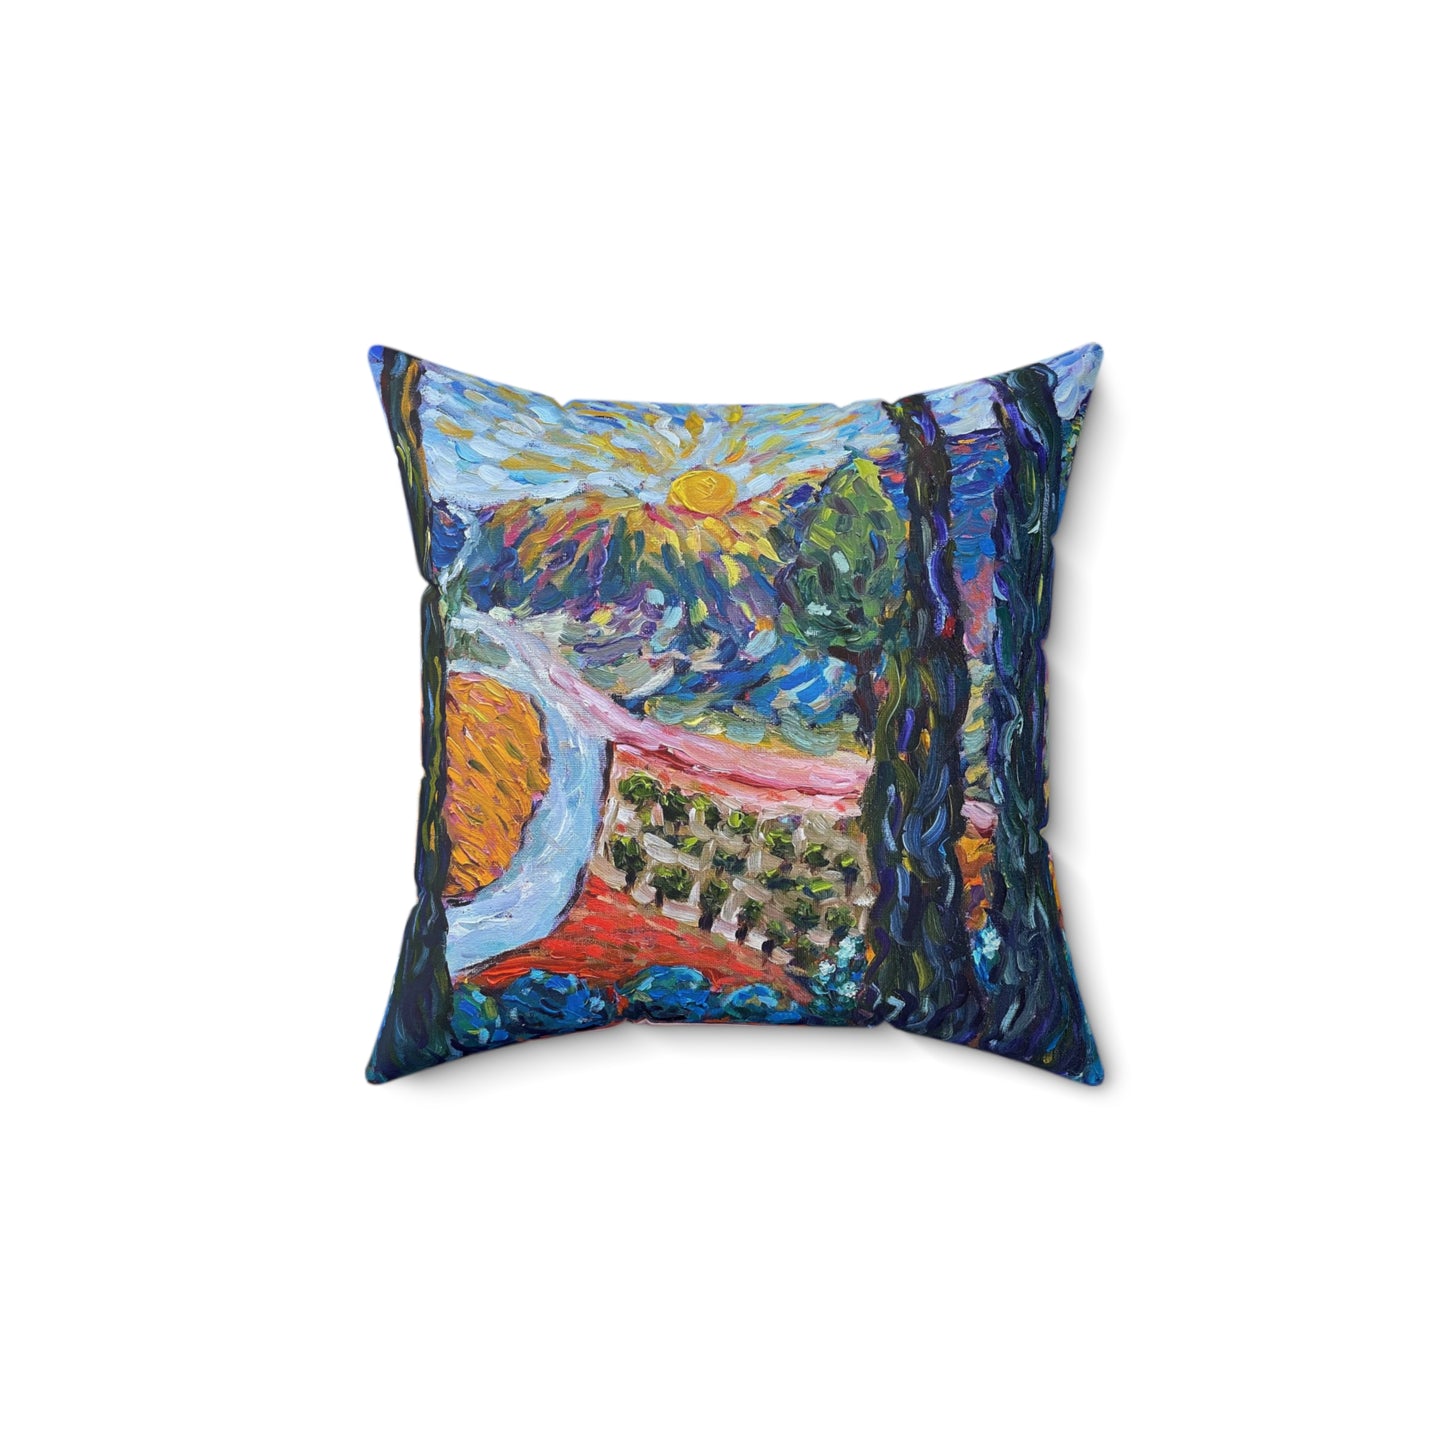 Sunny Cypresses Indoor Spun Polyester Square Pillow